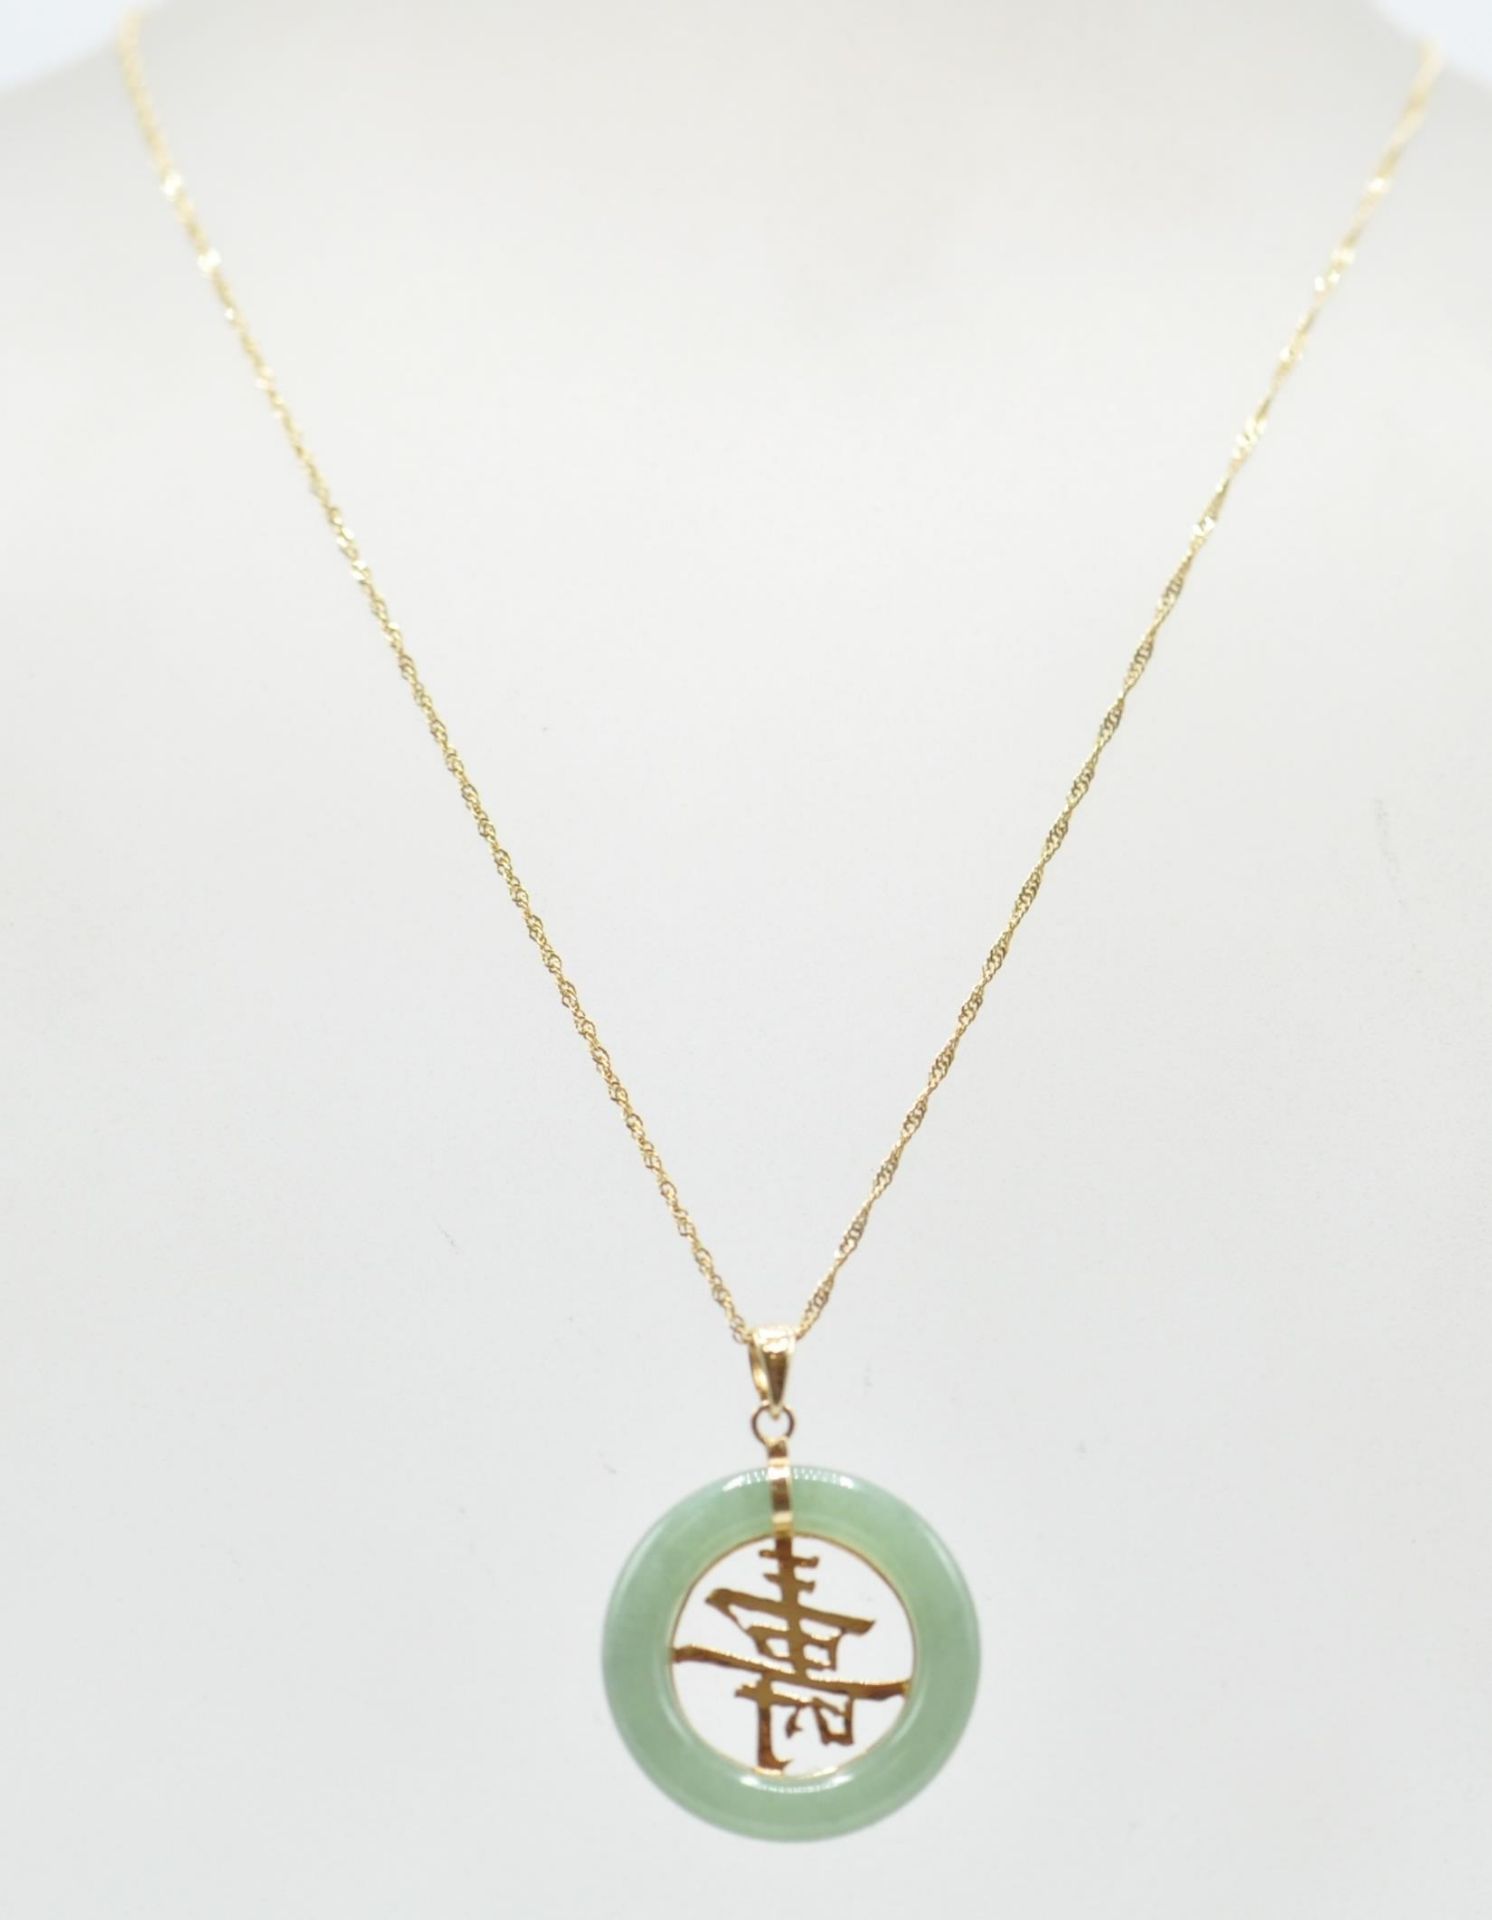 An 18ct gold necklace having a jade hoop and a gold chinese symbol set within. Chain measures